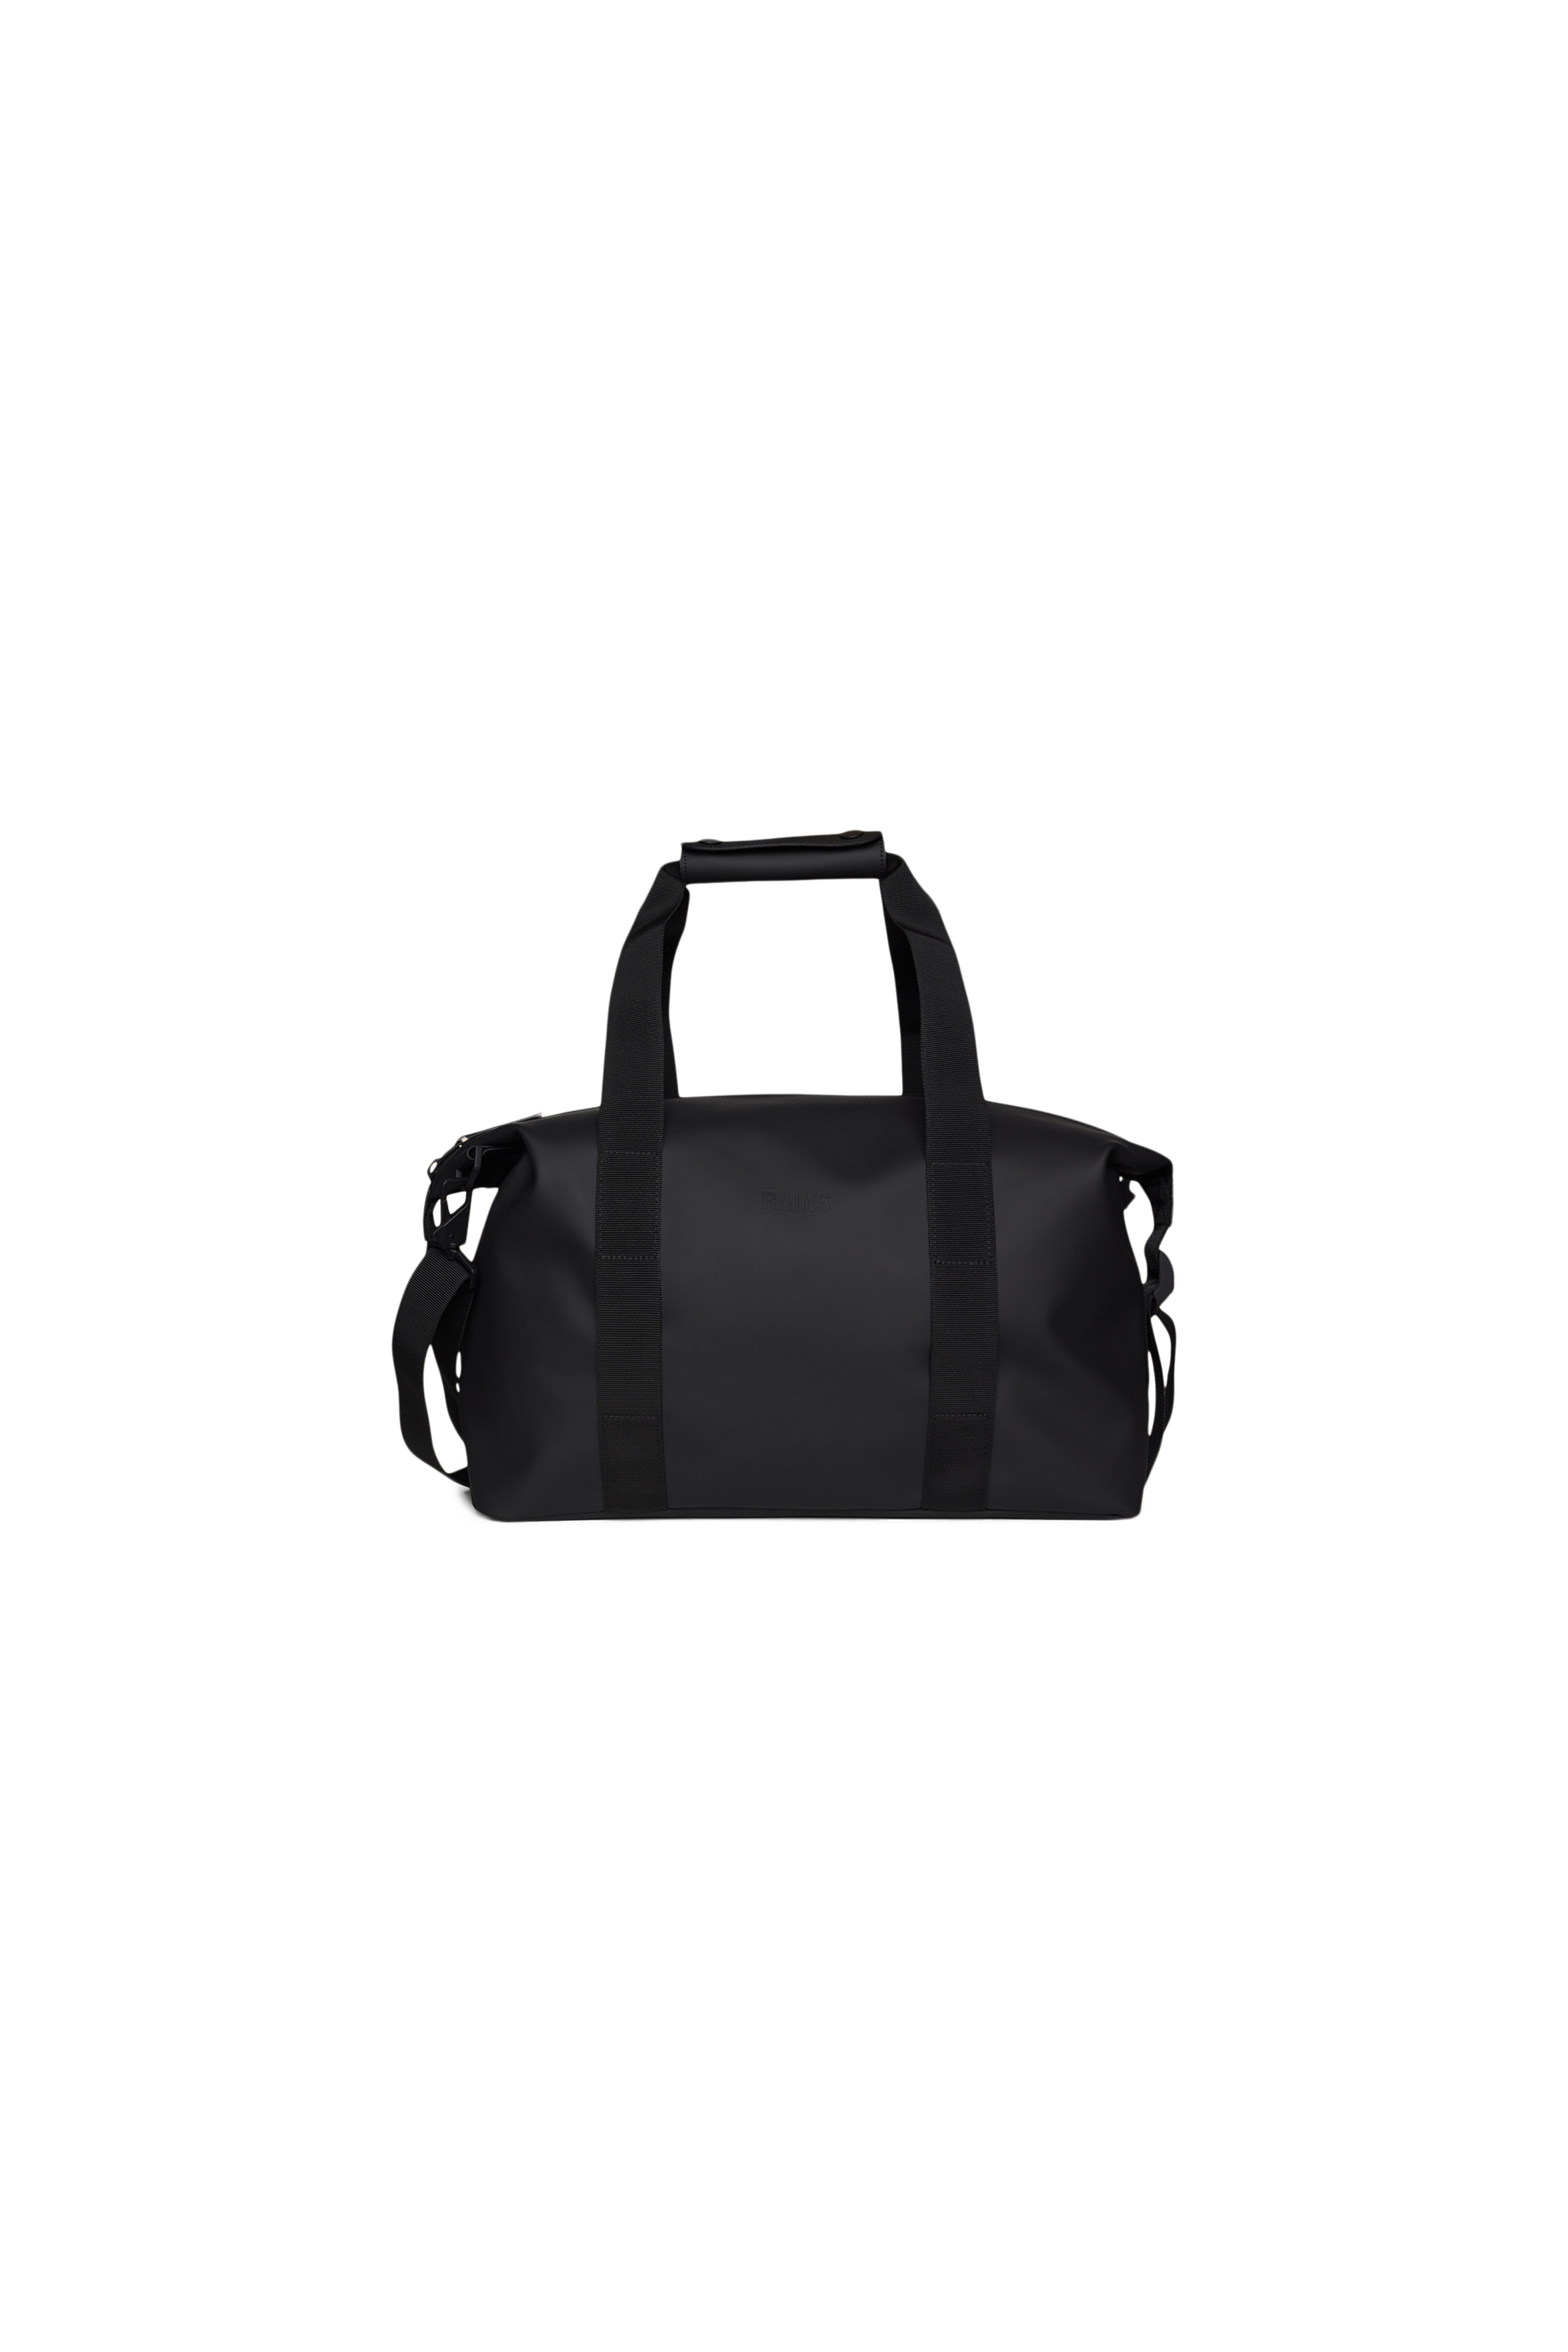 Rains® Hilo Weekend Bag Small in Candy for $95 | Free Shipping